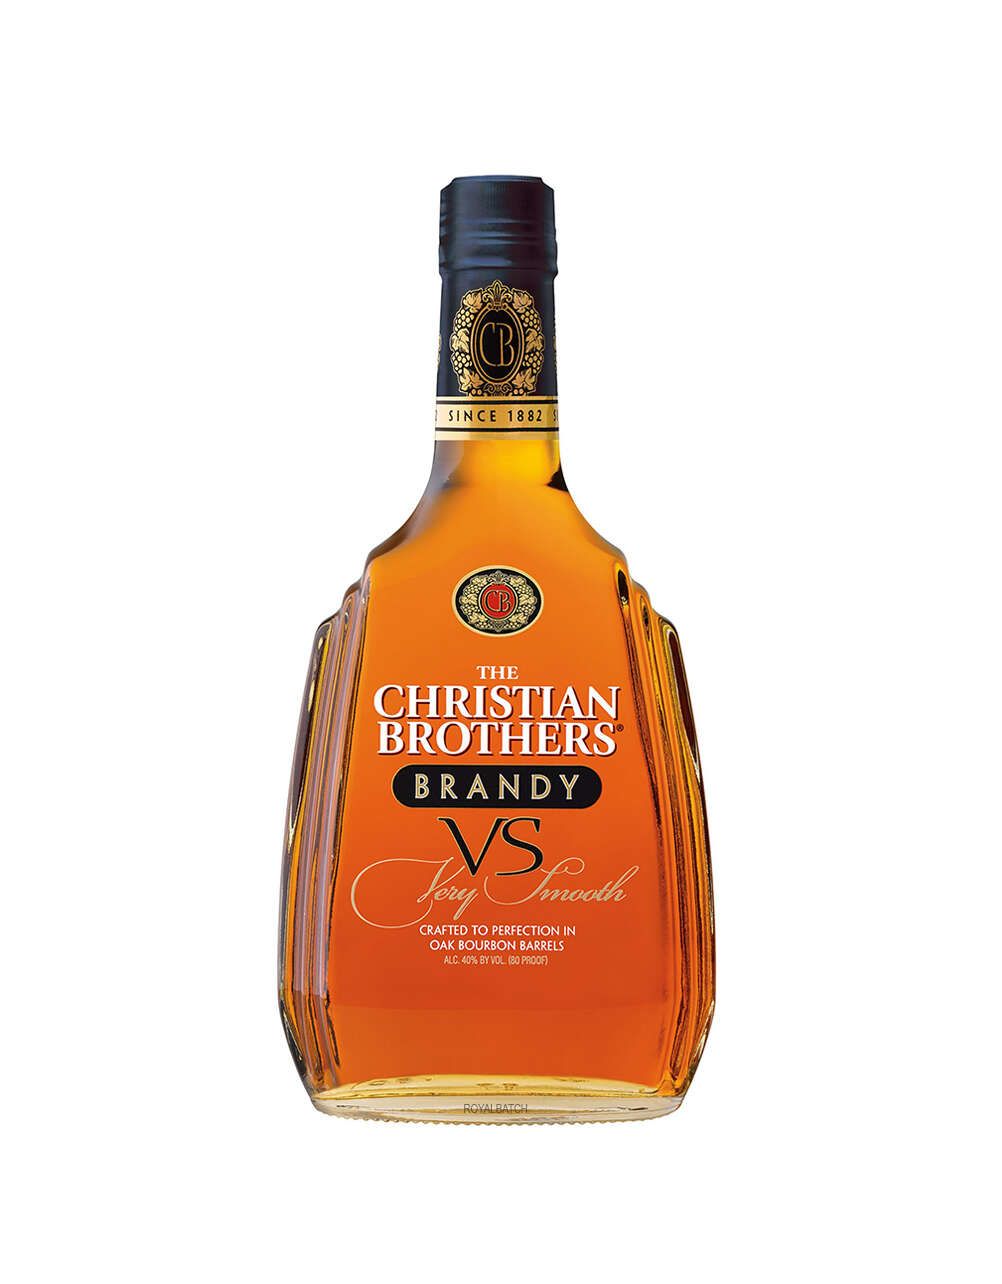 The Christian Brothers VS Very Smooth Brandy